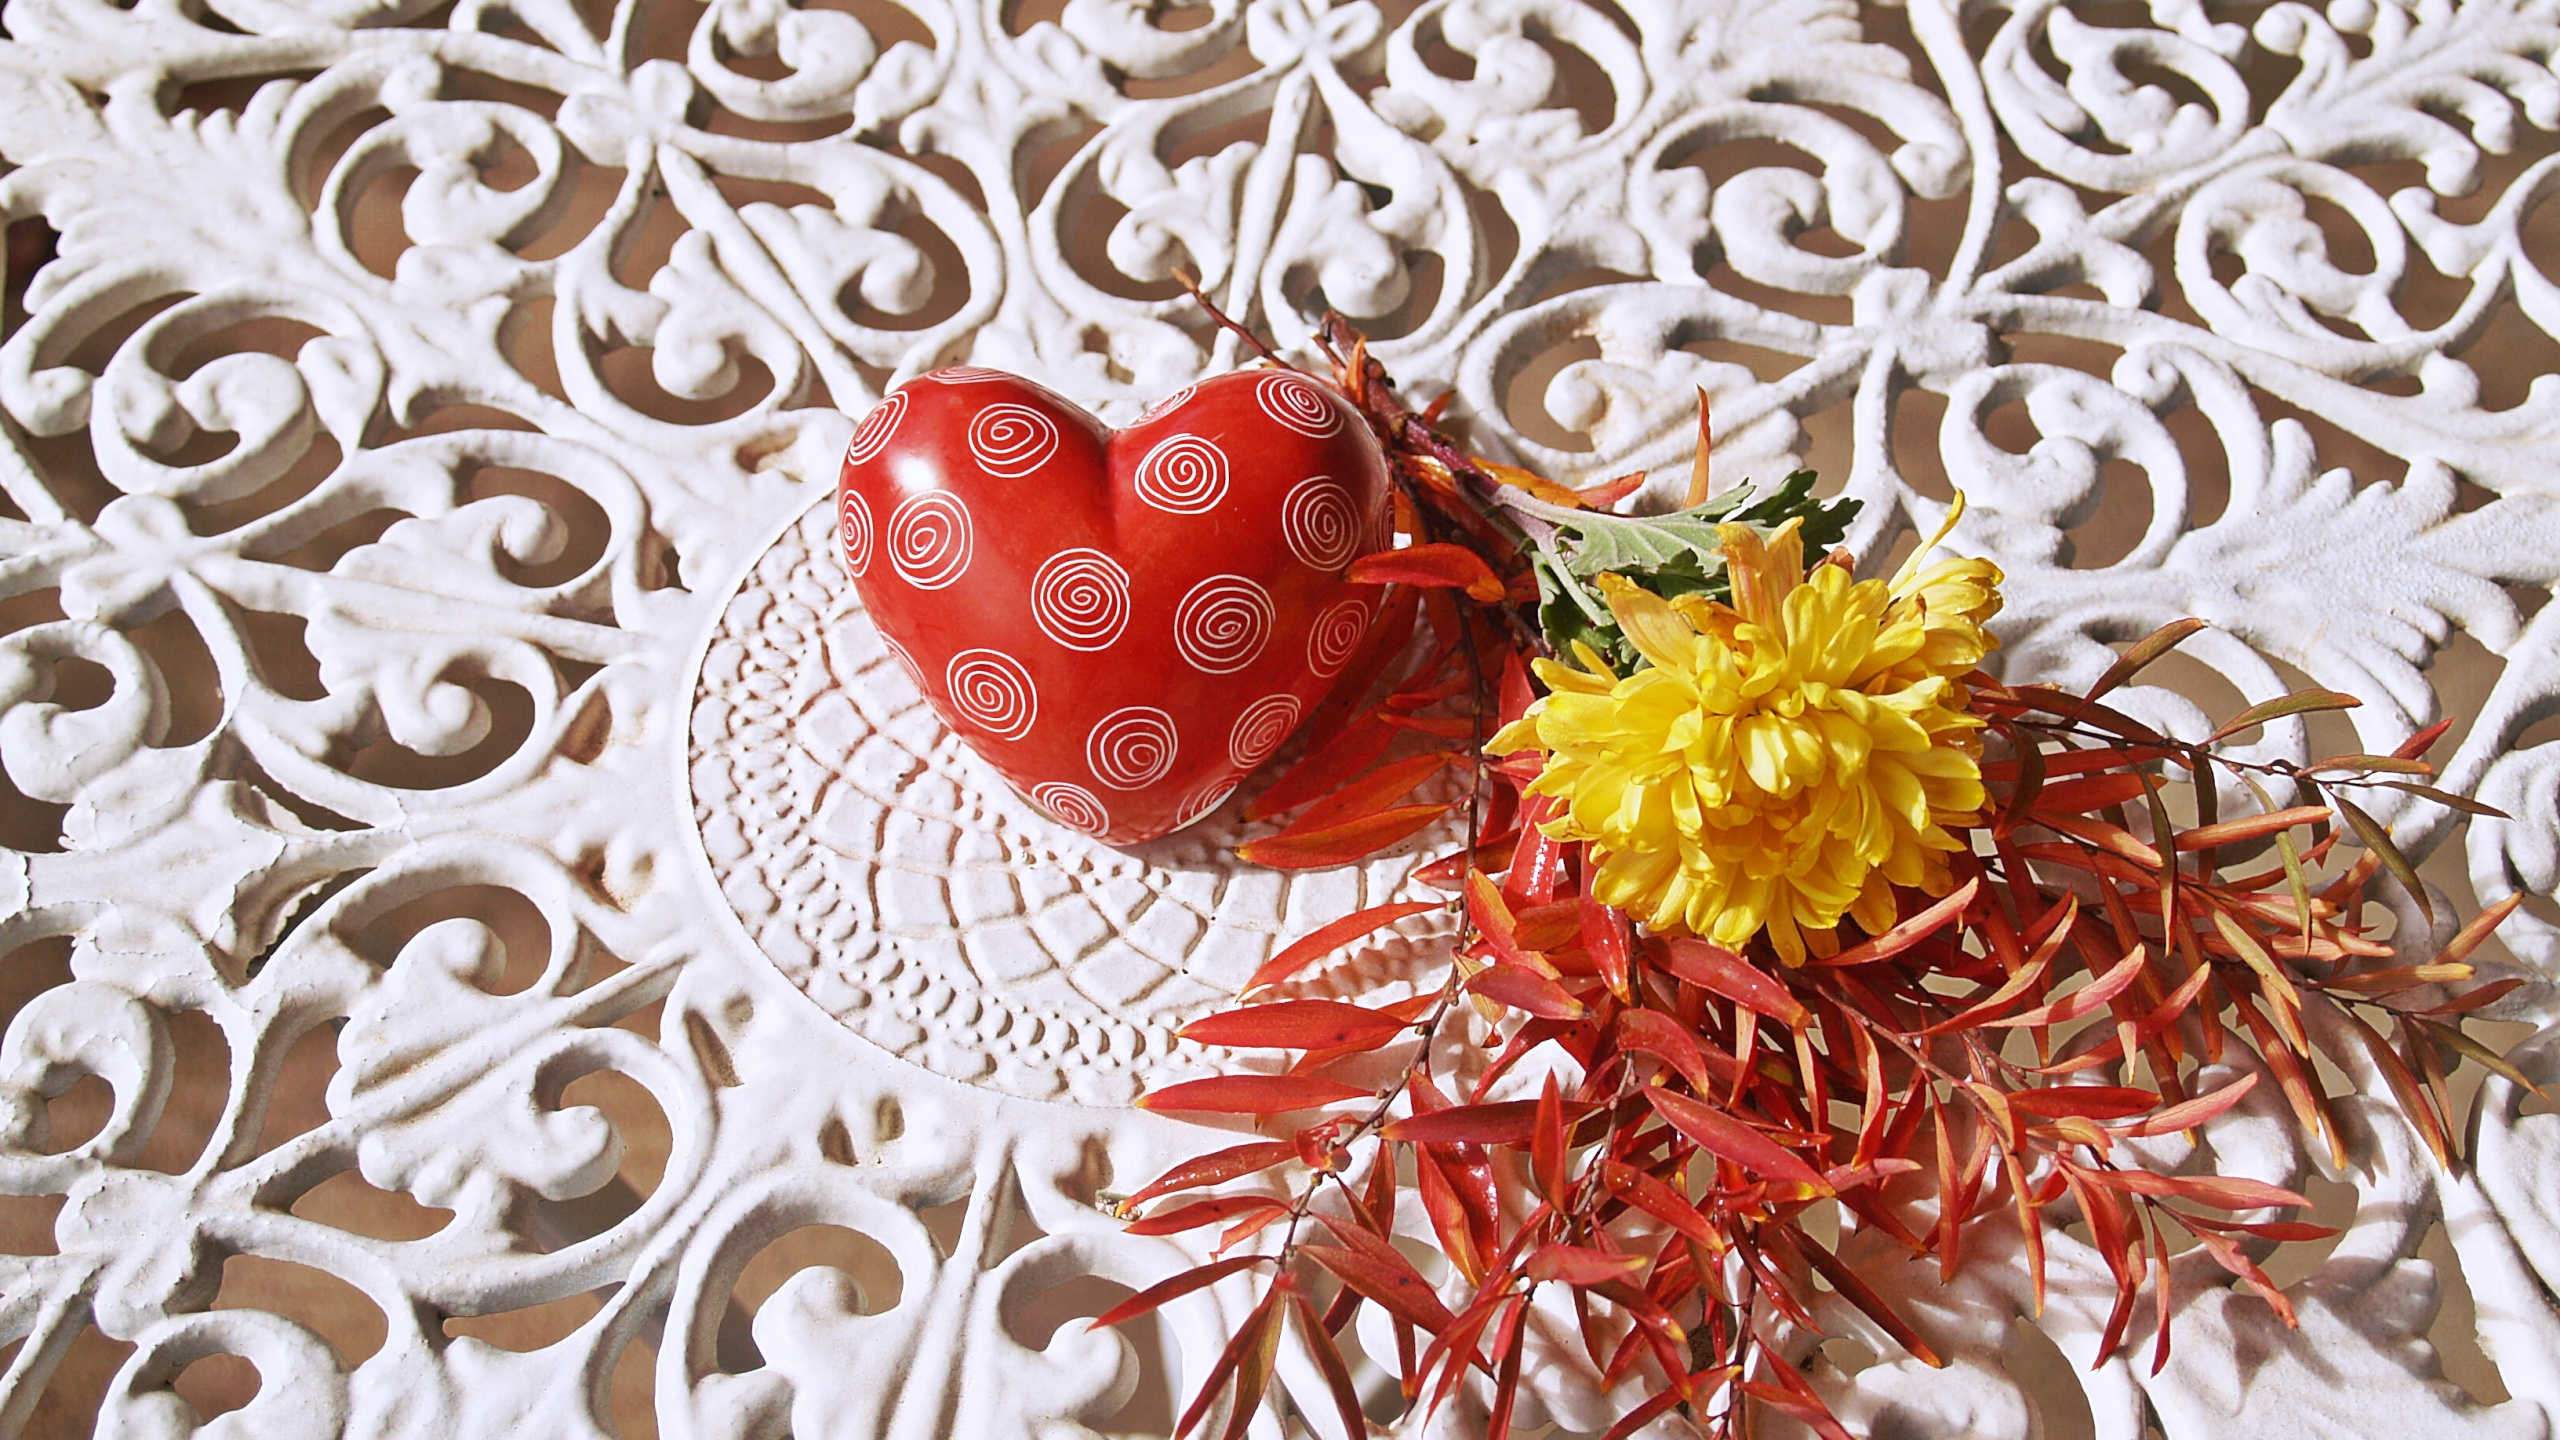 Flower, Red, Food, Textile, Plant. Wallpaper in 2560x1440 Resolution